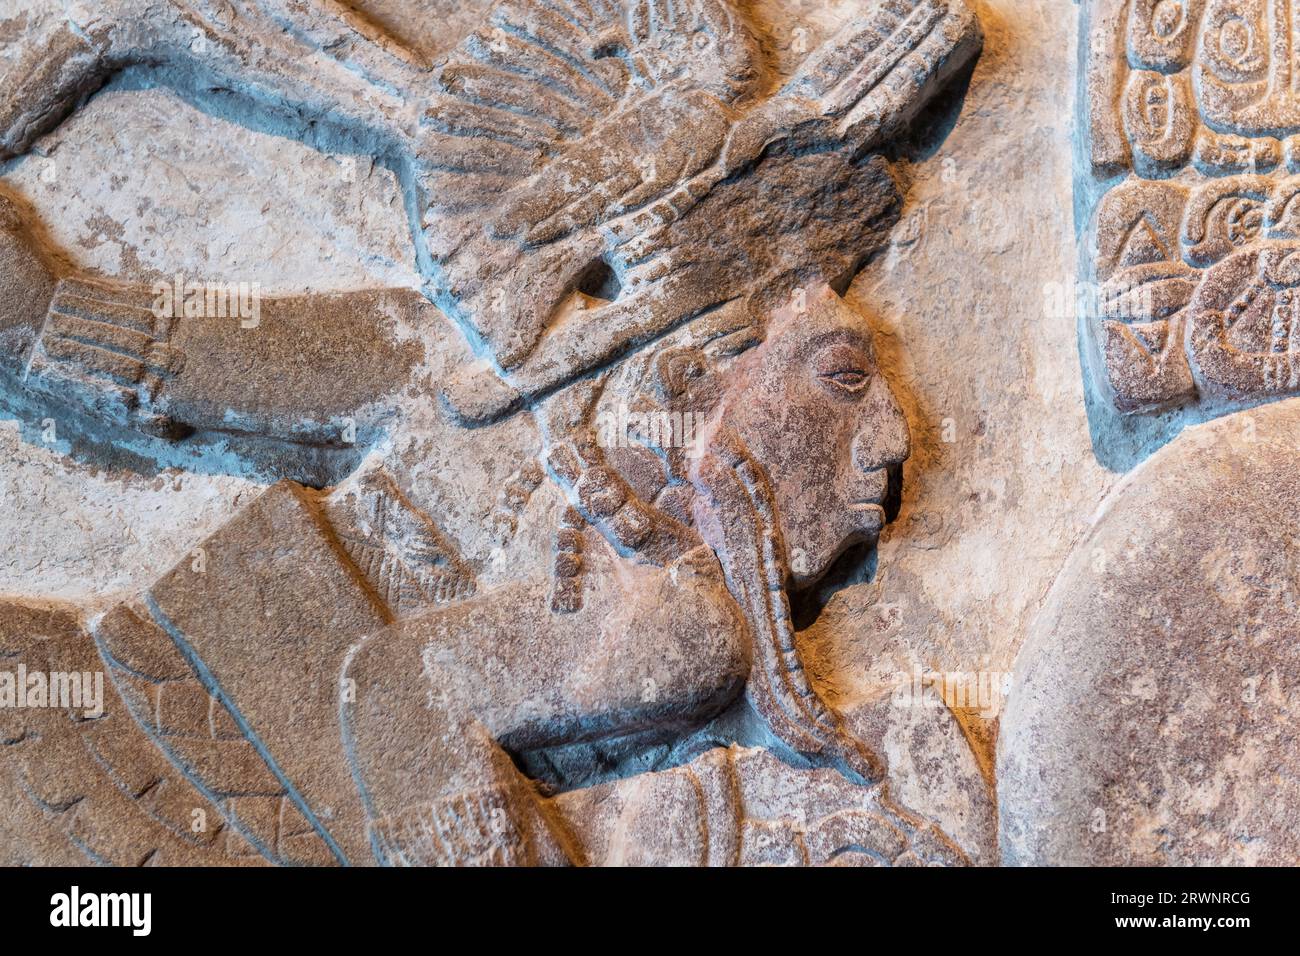 Maya bas relief carving in a stele tombstone of a mayan ruler king of Palenque city state, Mexico. Stock Photo